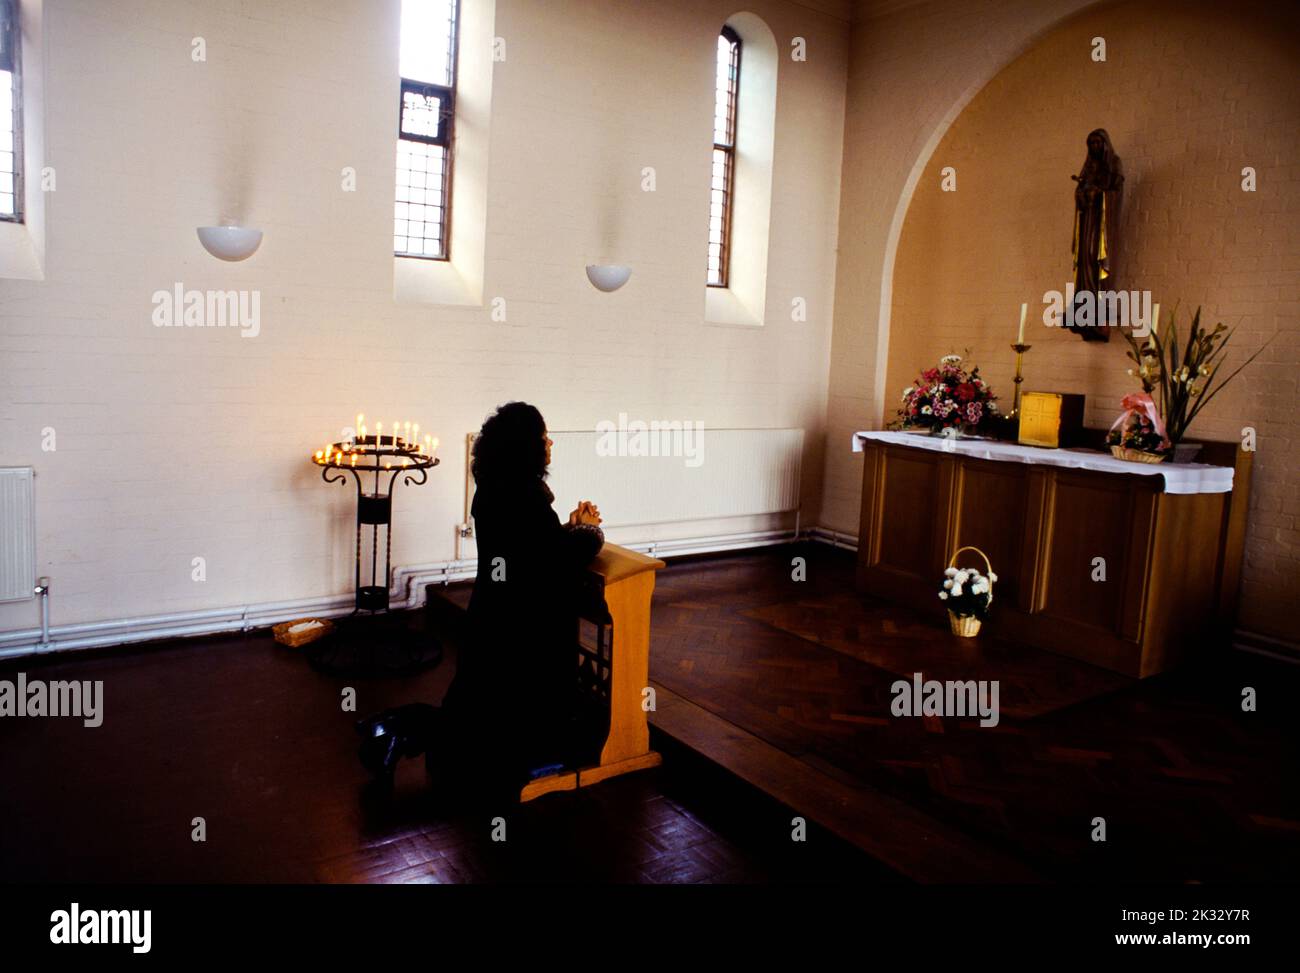 St Cecilias Roman Catholic Cheam Woman Praying Alone In Church looking at Altar with Virgin Mary And Candles Stock Photo